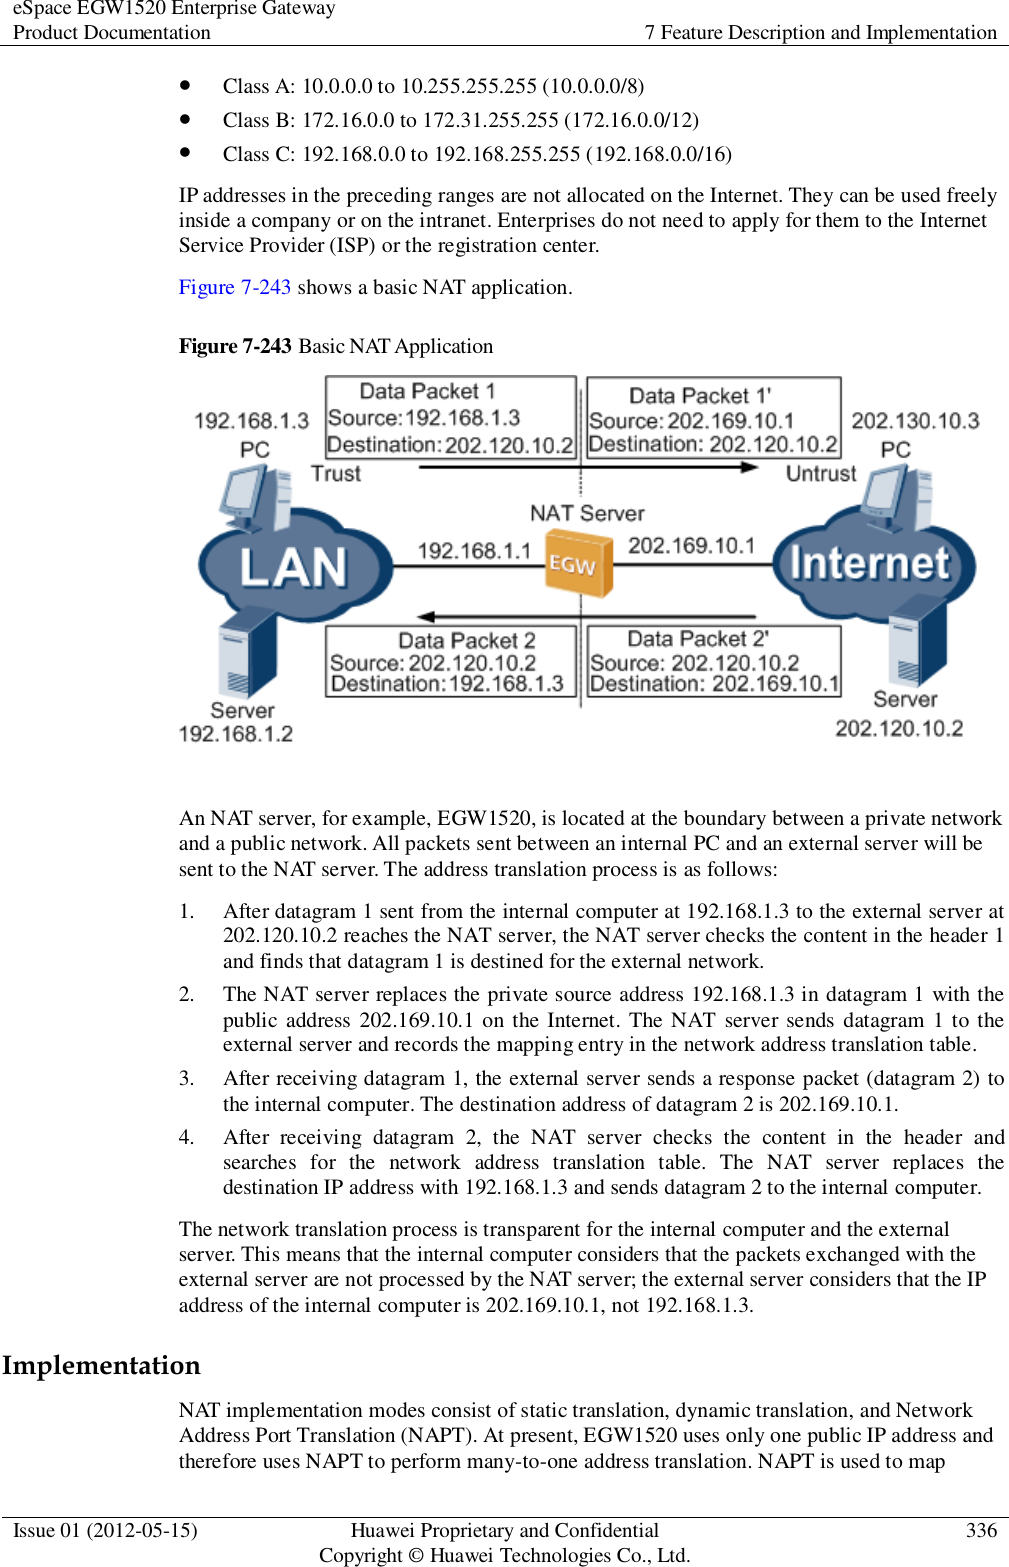 eSpace EGW1520 Enterprise Gateway Product Documentation 7 Feature Description and Implementation  Issue 01 (2012-05-15) Huawei Proprietary and Confidential                                     Copyright © Huawei Technologies Co., Ltd. 336   Class A: 10.0.0.0 to 10.255.255.255 (10.0.0.0/8)  Class B: 172.16.0.0 to 172.31.255.255 (172.16.0.0/12)  Class C: 192.168.0.0 to 192.168.255.255 (192.168.0.0/16) IP addresses in the preceding ranges are not allocated on the Internet. They can be used freely inside a company or on the intranet. Enterprises do not need to apply for them to the Internet Service Provider (ISP) or the registration center. Figure 7-243 shows a basic NAT application. Figure 7-243 Basic NAT Application   An NAT server, for example, EGW1520, is located at the boundary between a private network and a public network. All packets sent between an internal PC and an external server will be sent to the NAT server. The address translation process is as follows: 1. After datagram 1 sent from the internal computer at 192.168.1.3 to the external server at 202.120.10.2 reaches the NAT server, the NAT server checks the content in the header 1 and finds that datagram 1 is destined for the external network. 2. The NAT server replaces the private source address 192.168.1.3 in datagram 1 with the public address 202.169.10.1 on the Internet. The NAT  server sends datagram  1 to the external server and records the mapping entry in the network address translation table. 3. After receiving datagram 1, the external server sends a response packet (datagram 2) to the internal computer. The destination address of datagram 2 is 202.169.10.1. 4. After  receiving  datagram  2,  the  NAT  server  checks  the  content  in  the  header  and searches  for  the  network  address  translation  table.  The  NAT  server  replaces  the destination IP address with 192.168.1.3 and sends datagram 2 to the internal computer. The network translation process is transparent for the internal computer and the external server. This means that the internal computer considers that the packets exchanged with the external server are not processed by the NAT server; the external server considers that the IP address of the internal computer is 202.169.10.1, not 192.168.1.3. Implementation NAT implementation modes consist of static translation, dynamic translation, and Network Address Port Translation (NAPT). At present, EGW1520 uses only one public IP address and therefore uses NAPT to perform many-to-one address translation. NAPT is used to map 